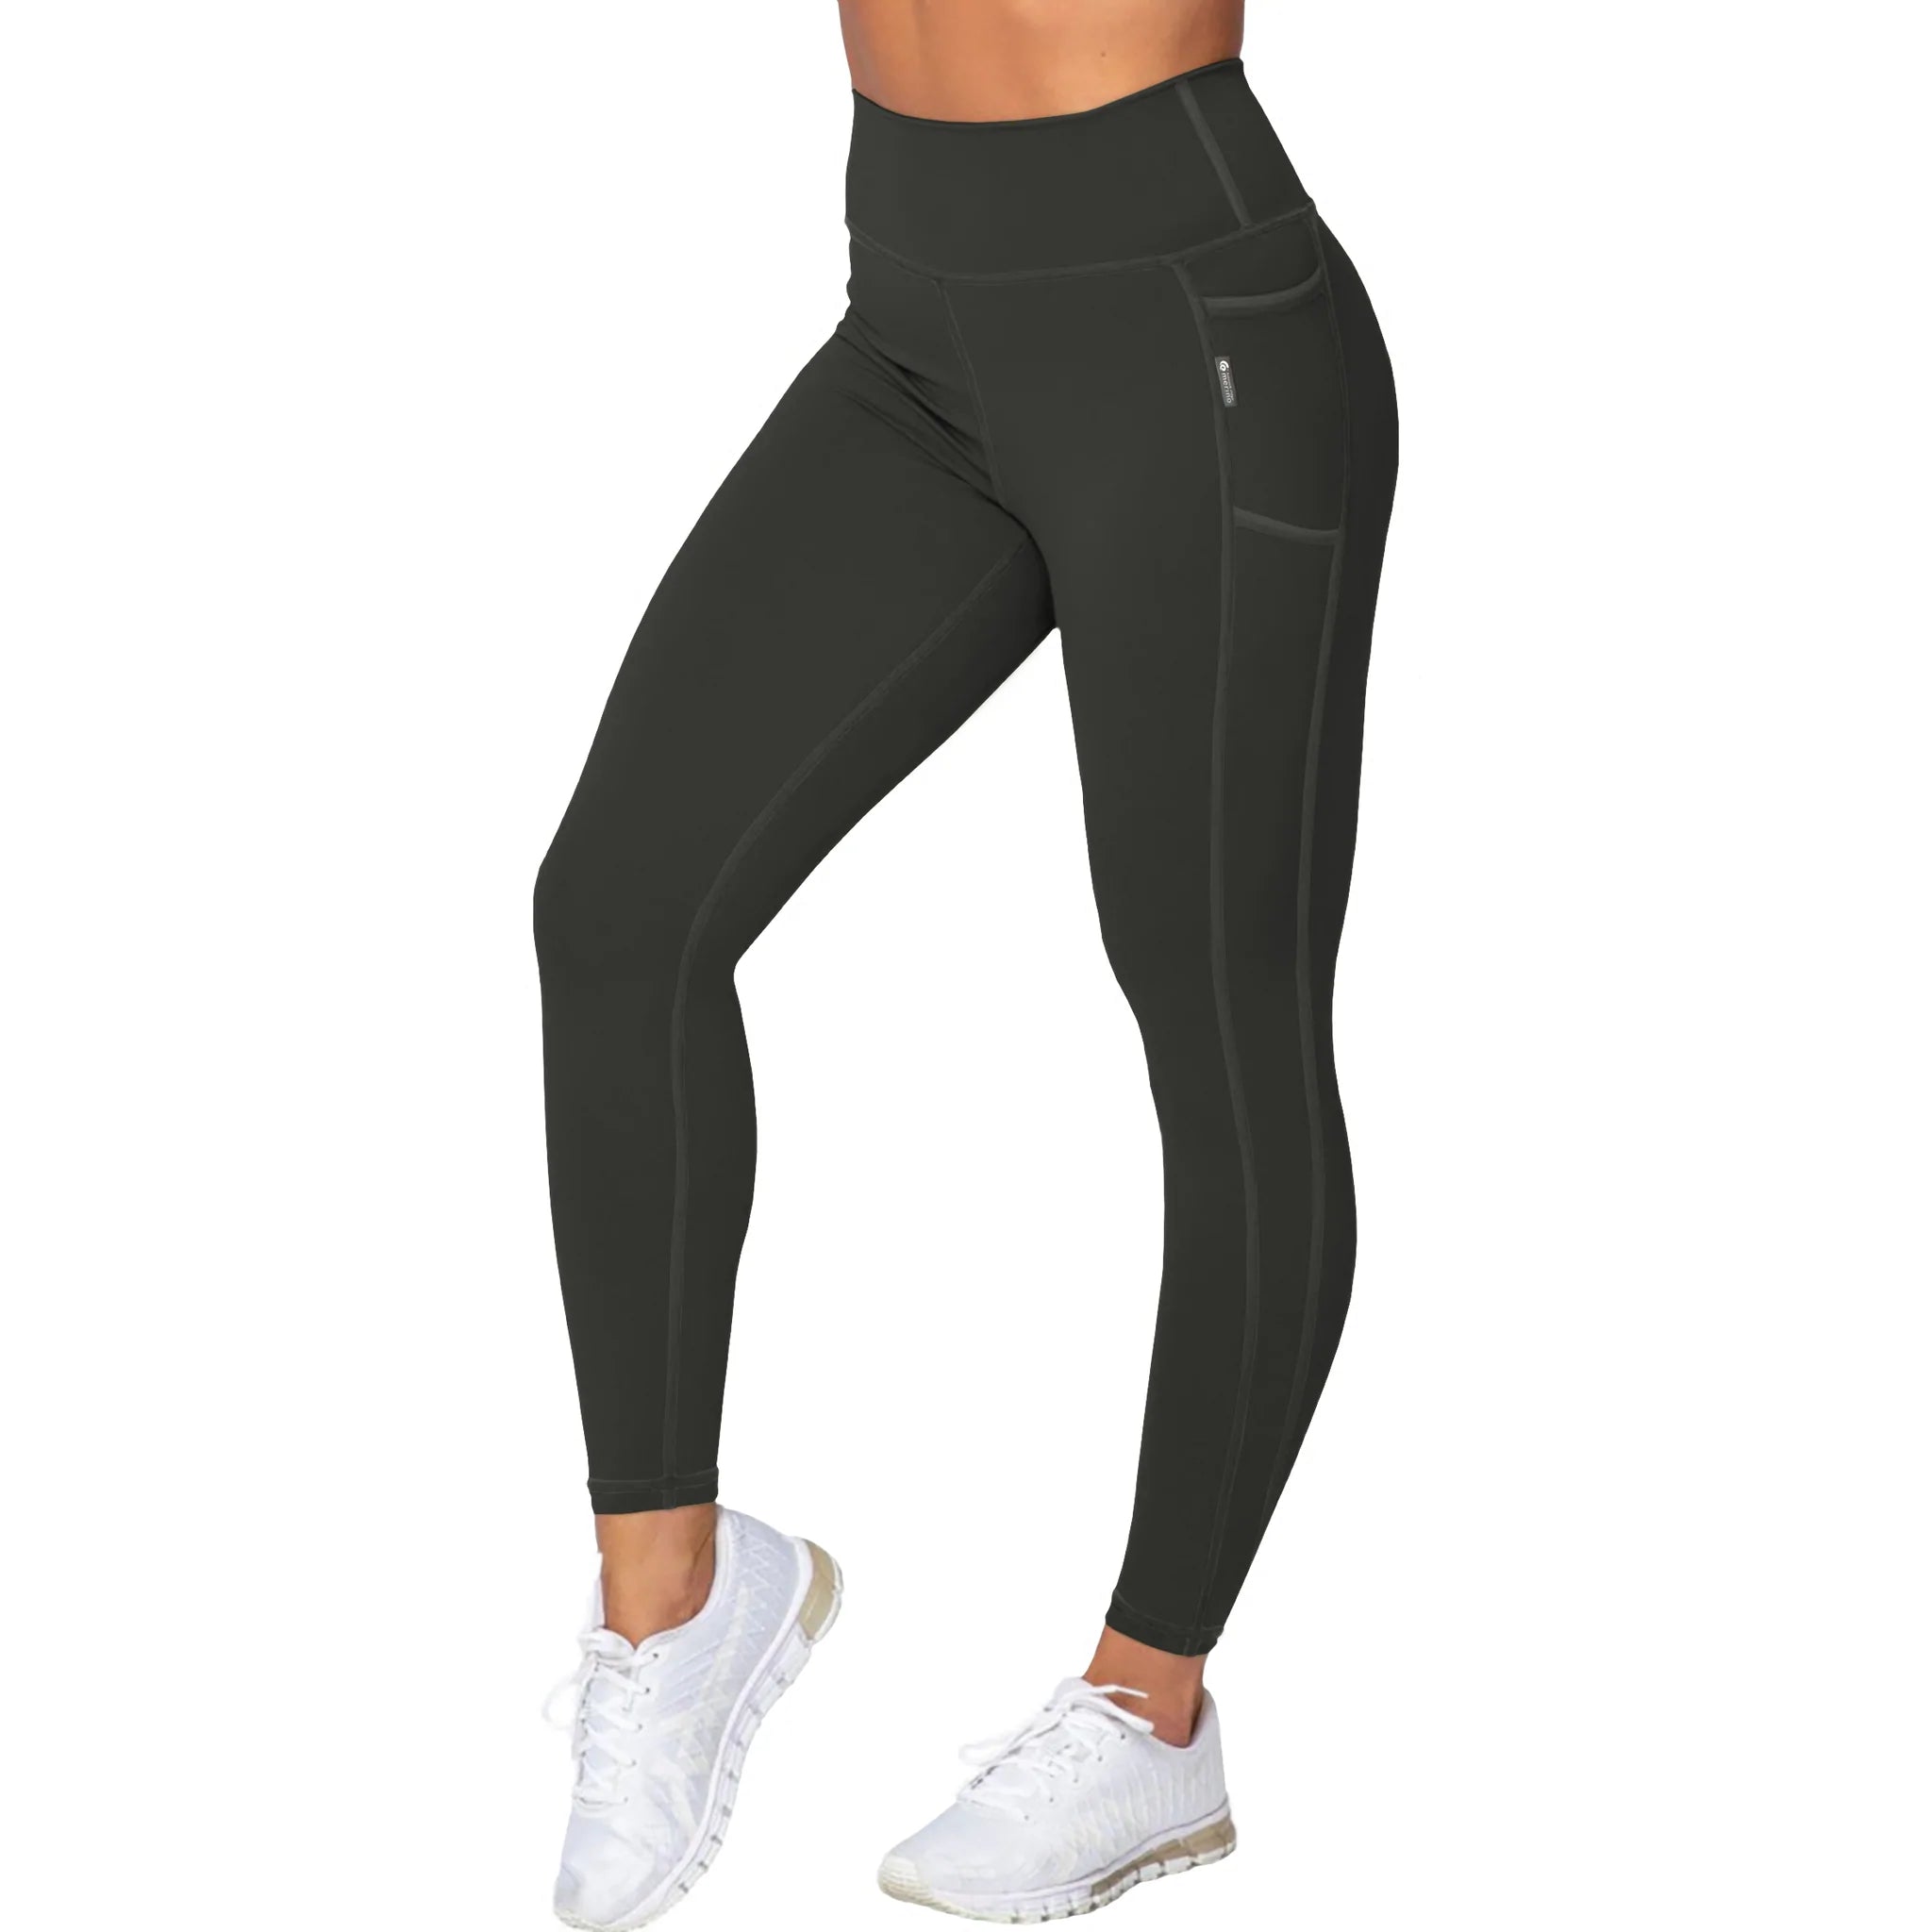 Ladies Charcoal Leggings. Made in New Zealand.